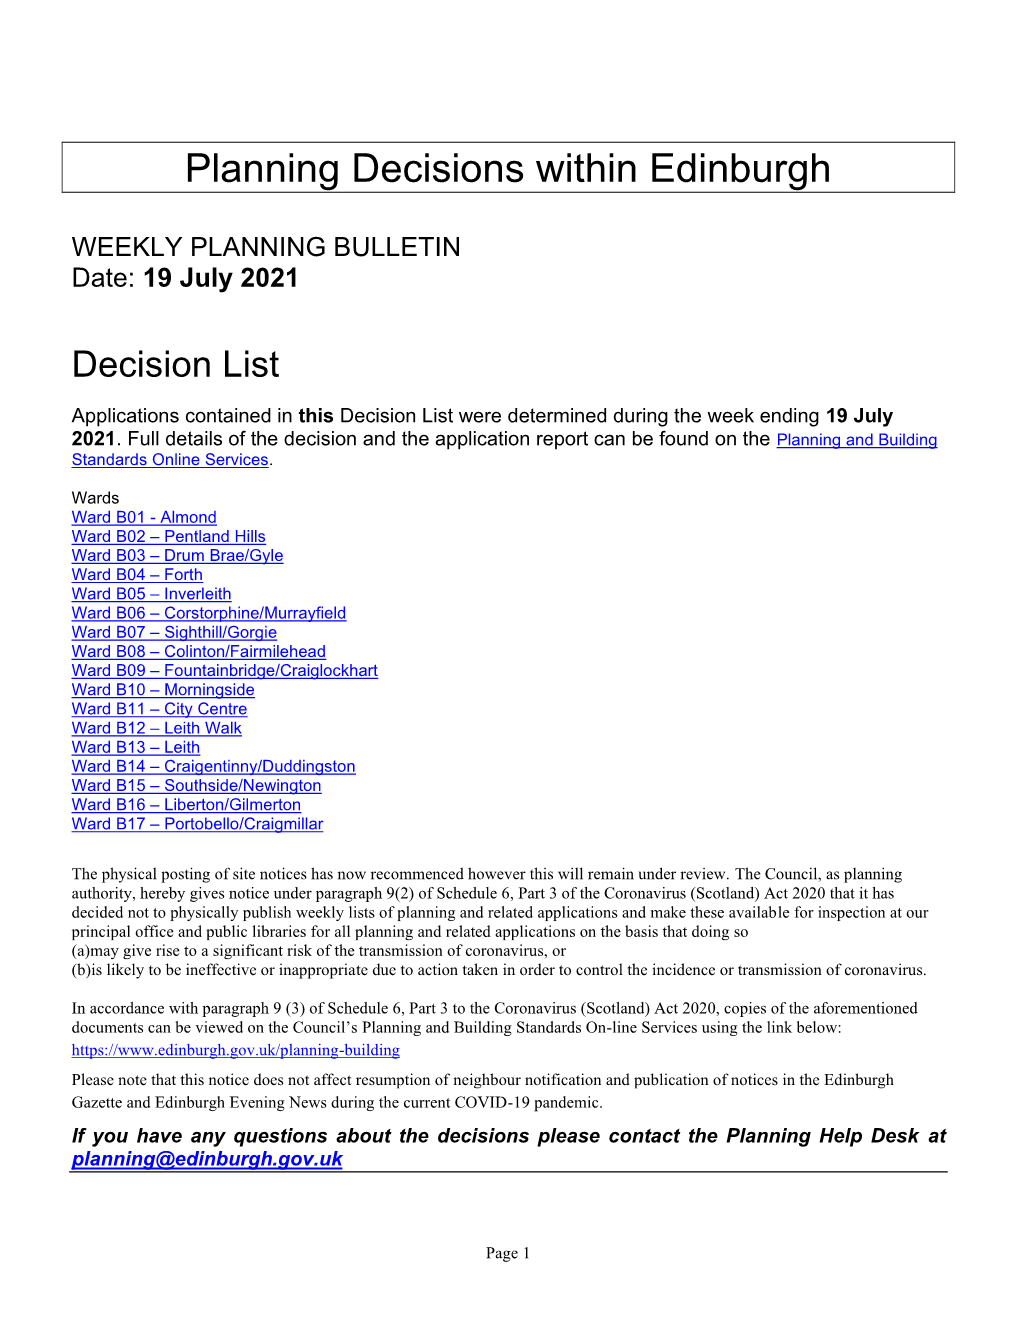 WEEKLY PLANNING BULLETIN Date: 19 July 2021